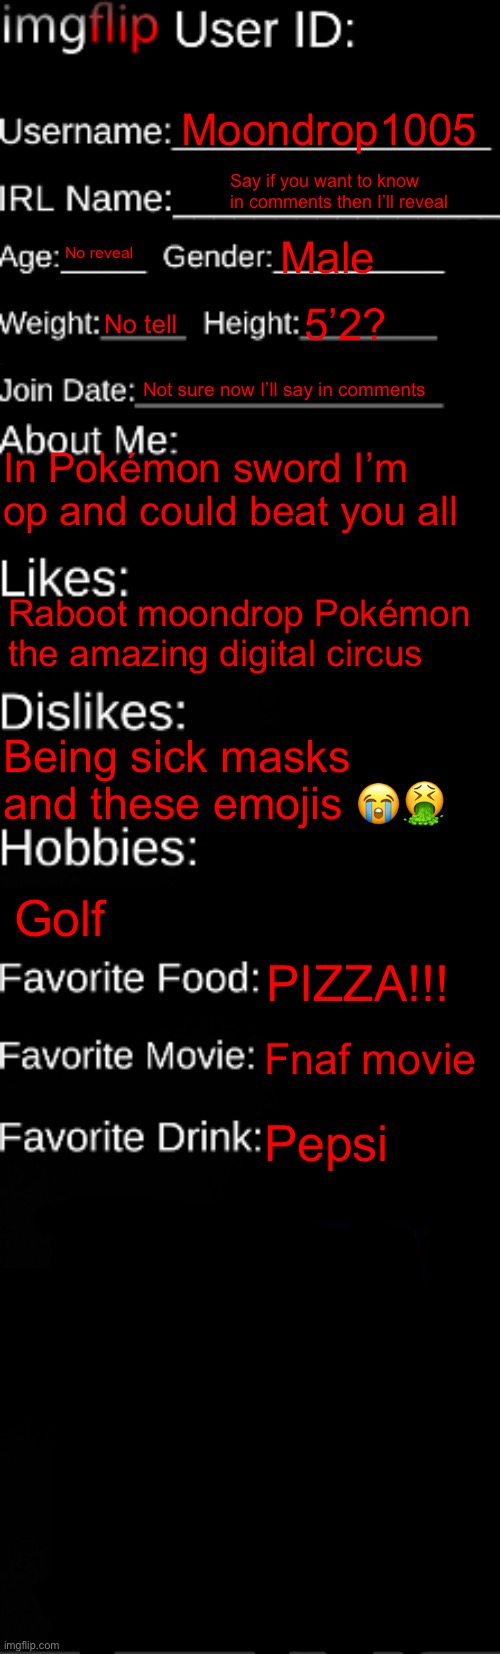 About me | Moondrop1005; Say if you want to know in comments then I’ll reveal; No reveal; Male; No tell; 5’2? Not sure now I’ll say in comments; In Pokémon sword I’m op and could beat you all; Raboot moondrop Pokémon the amazing digital circus; Being sick masks and these emojis 😭🤮; Golf; PIZZA!!! Fnaf movie; Pepsi | image tagged in imgflip id card | made w/ Imgflip meme maker